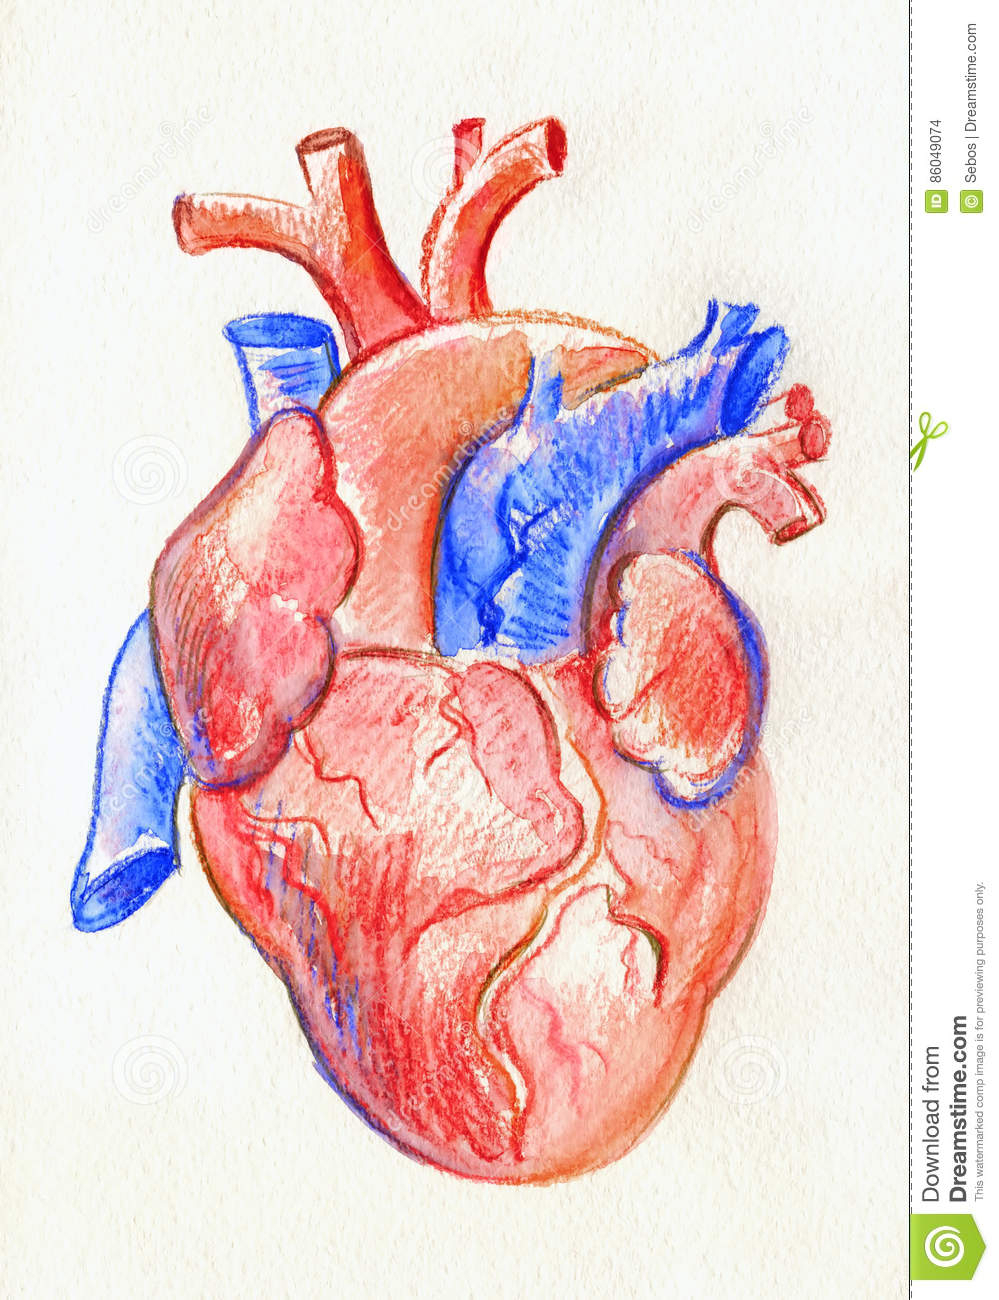 Human Heart Drawing Colored